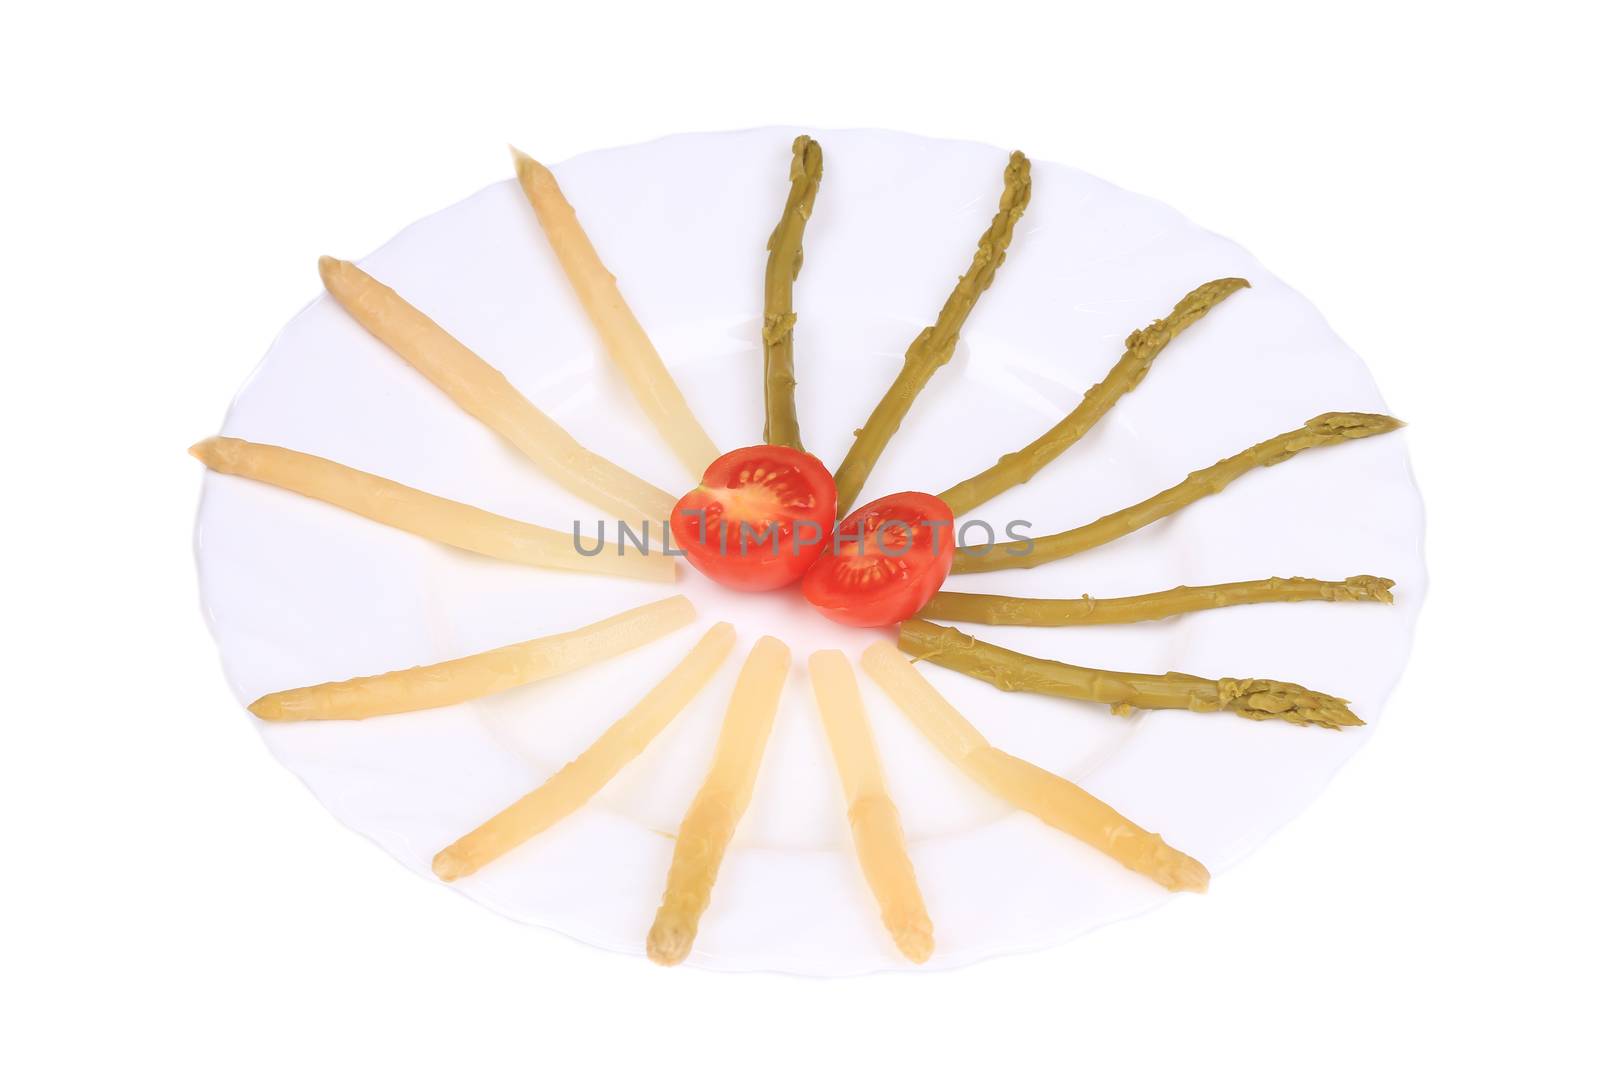 Asparagus and tomato-cherry. Isolated on a white background.